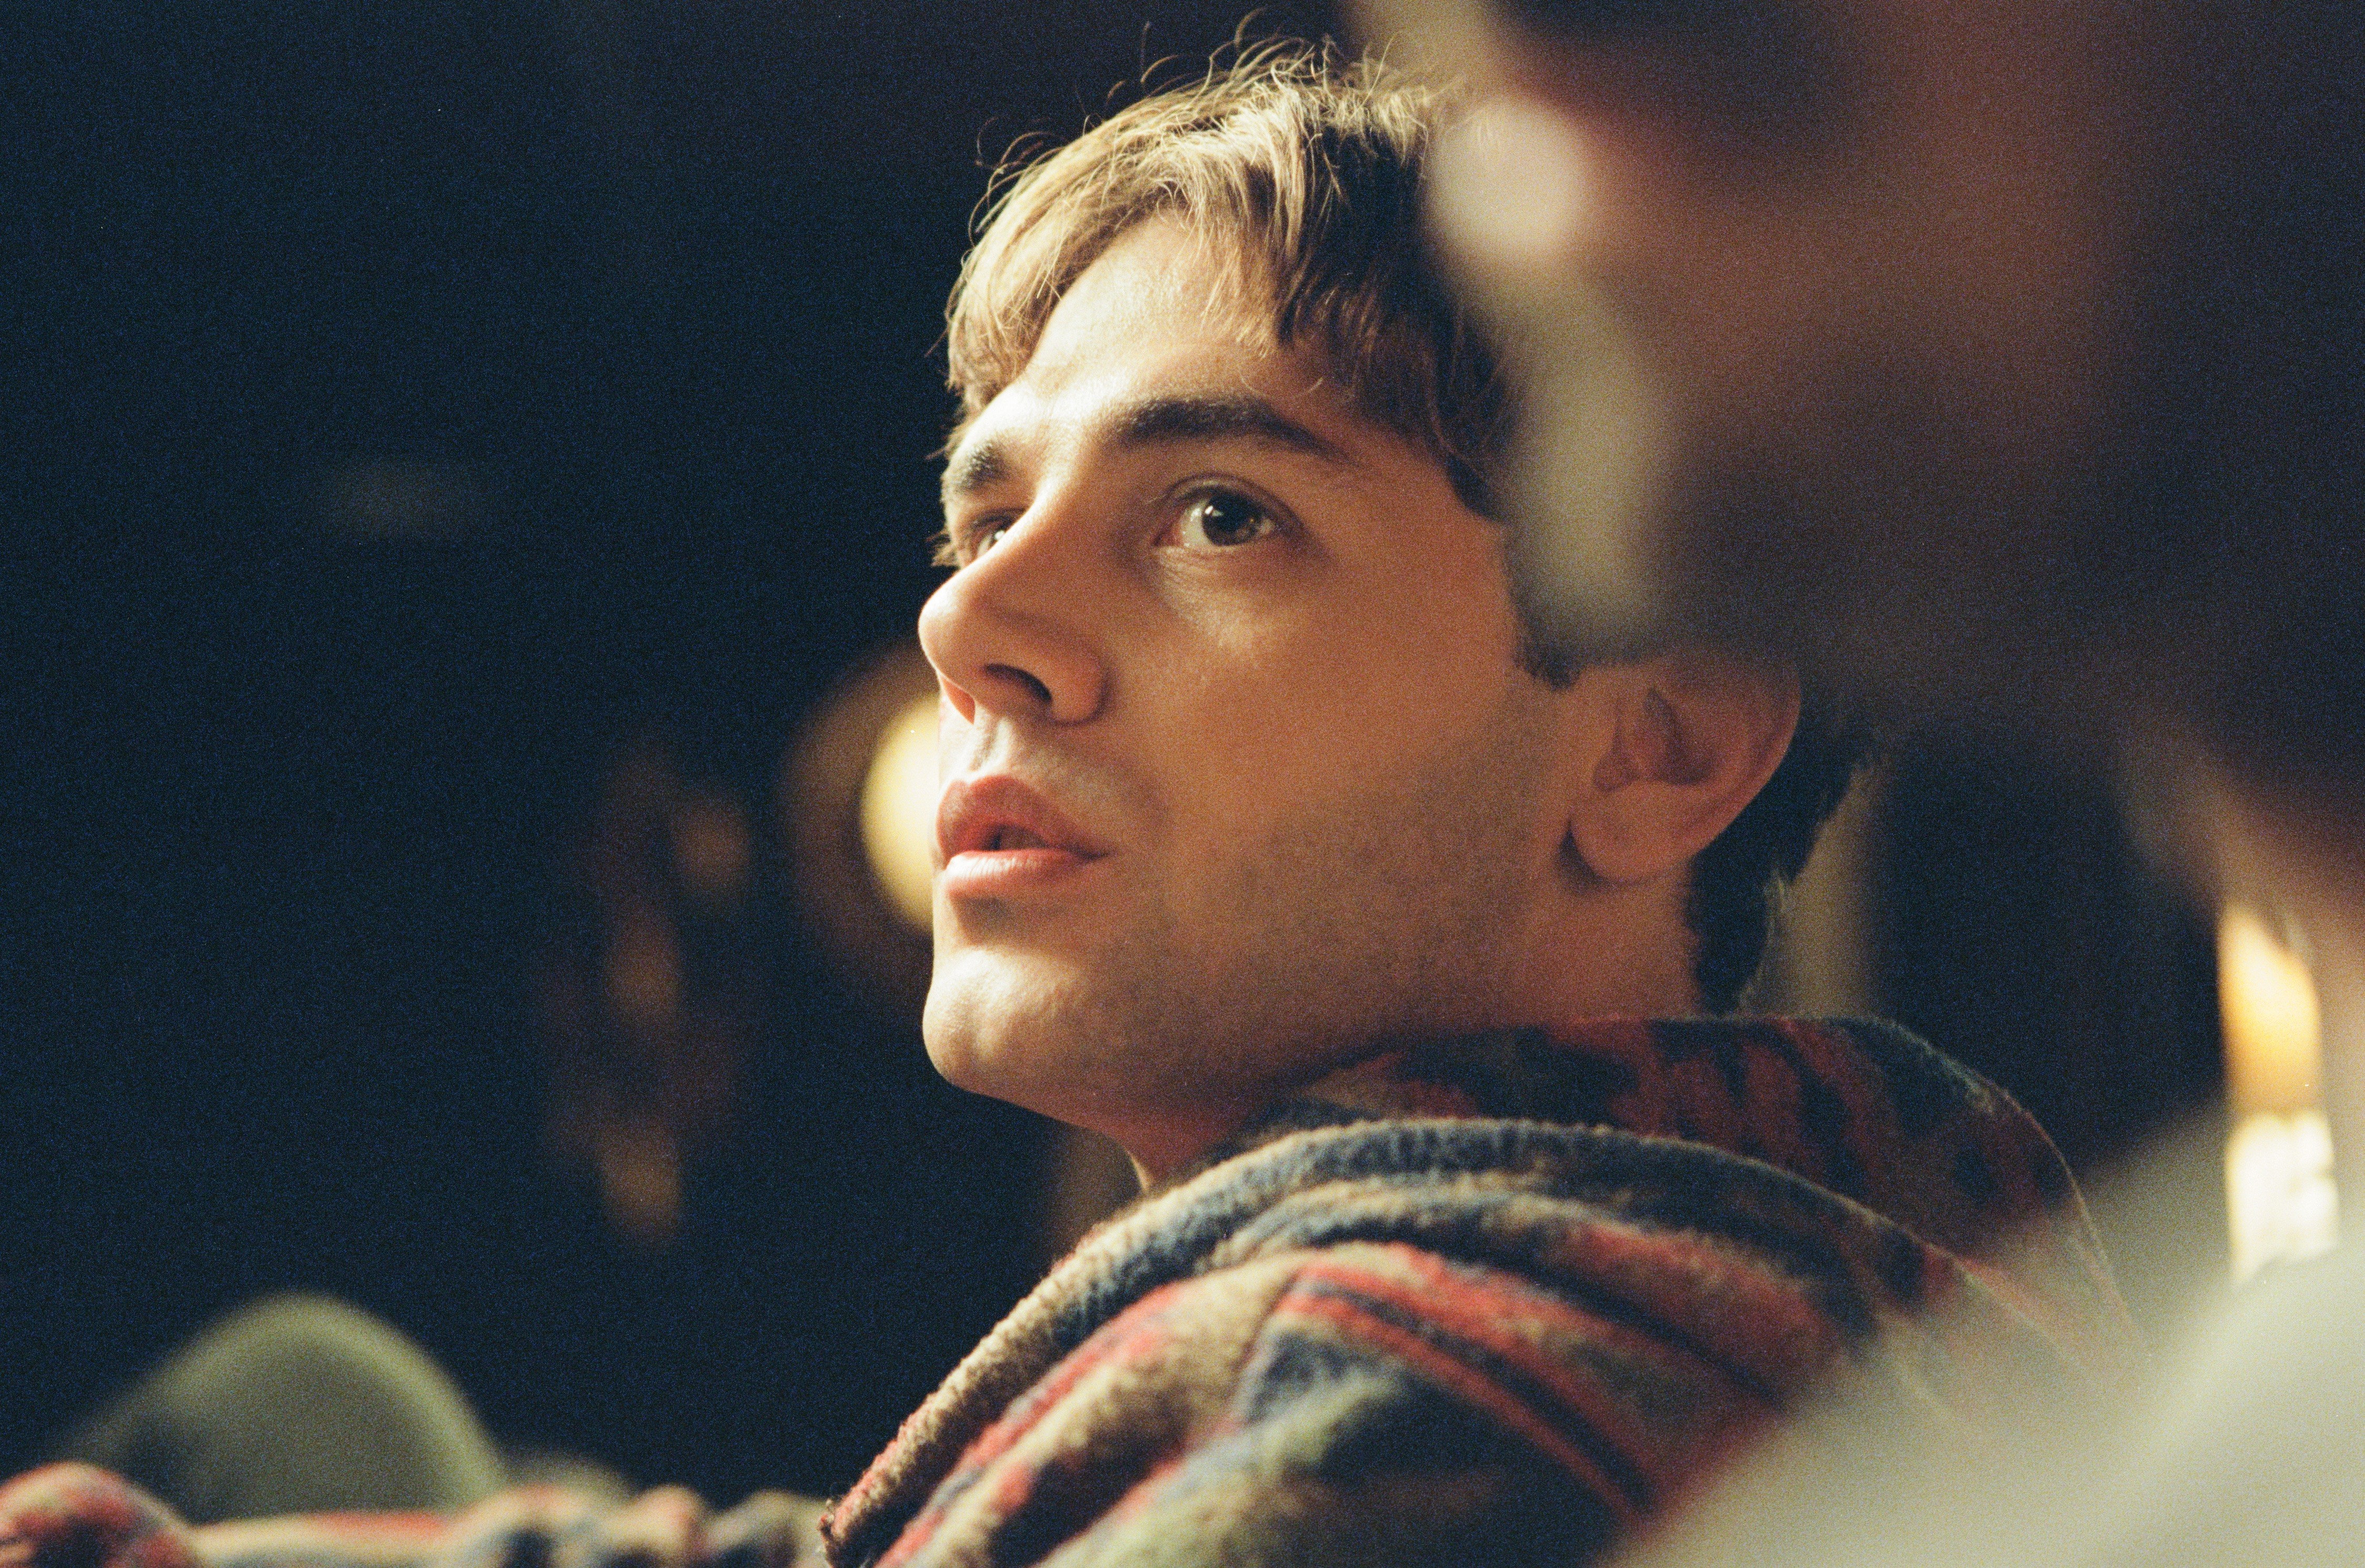 The little prince: Interview with Xavier Dolan